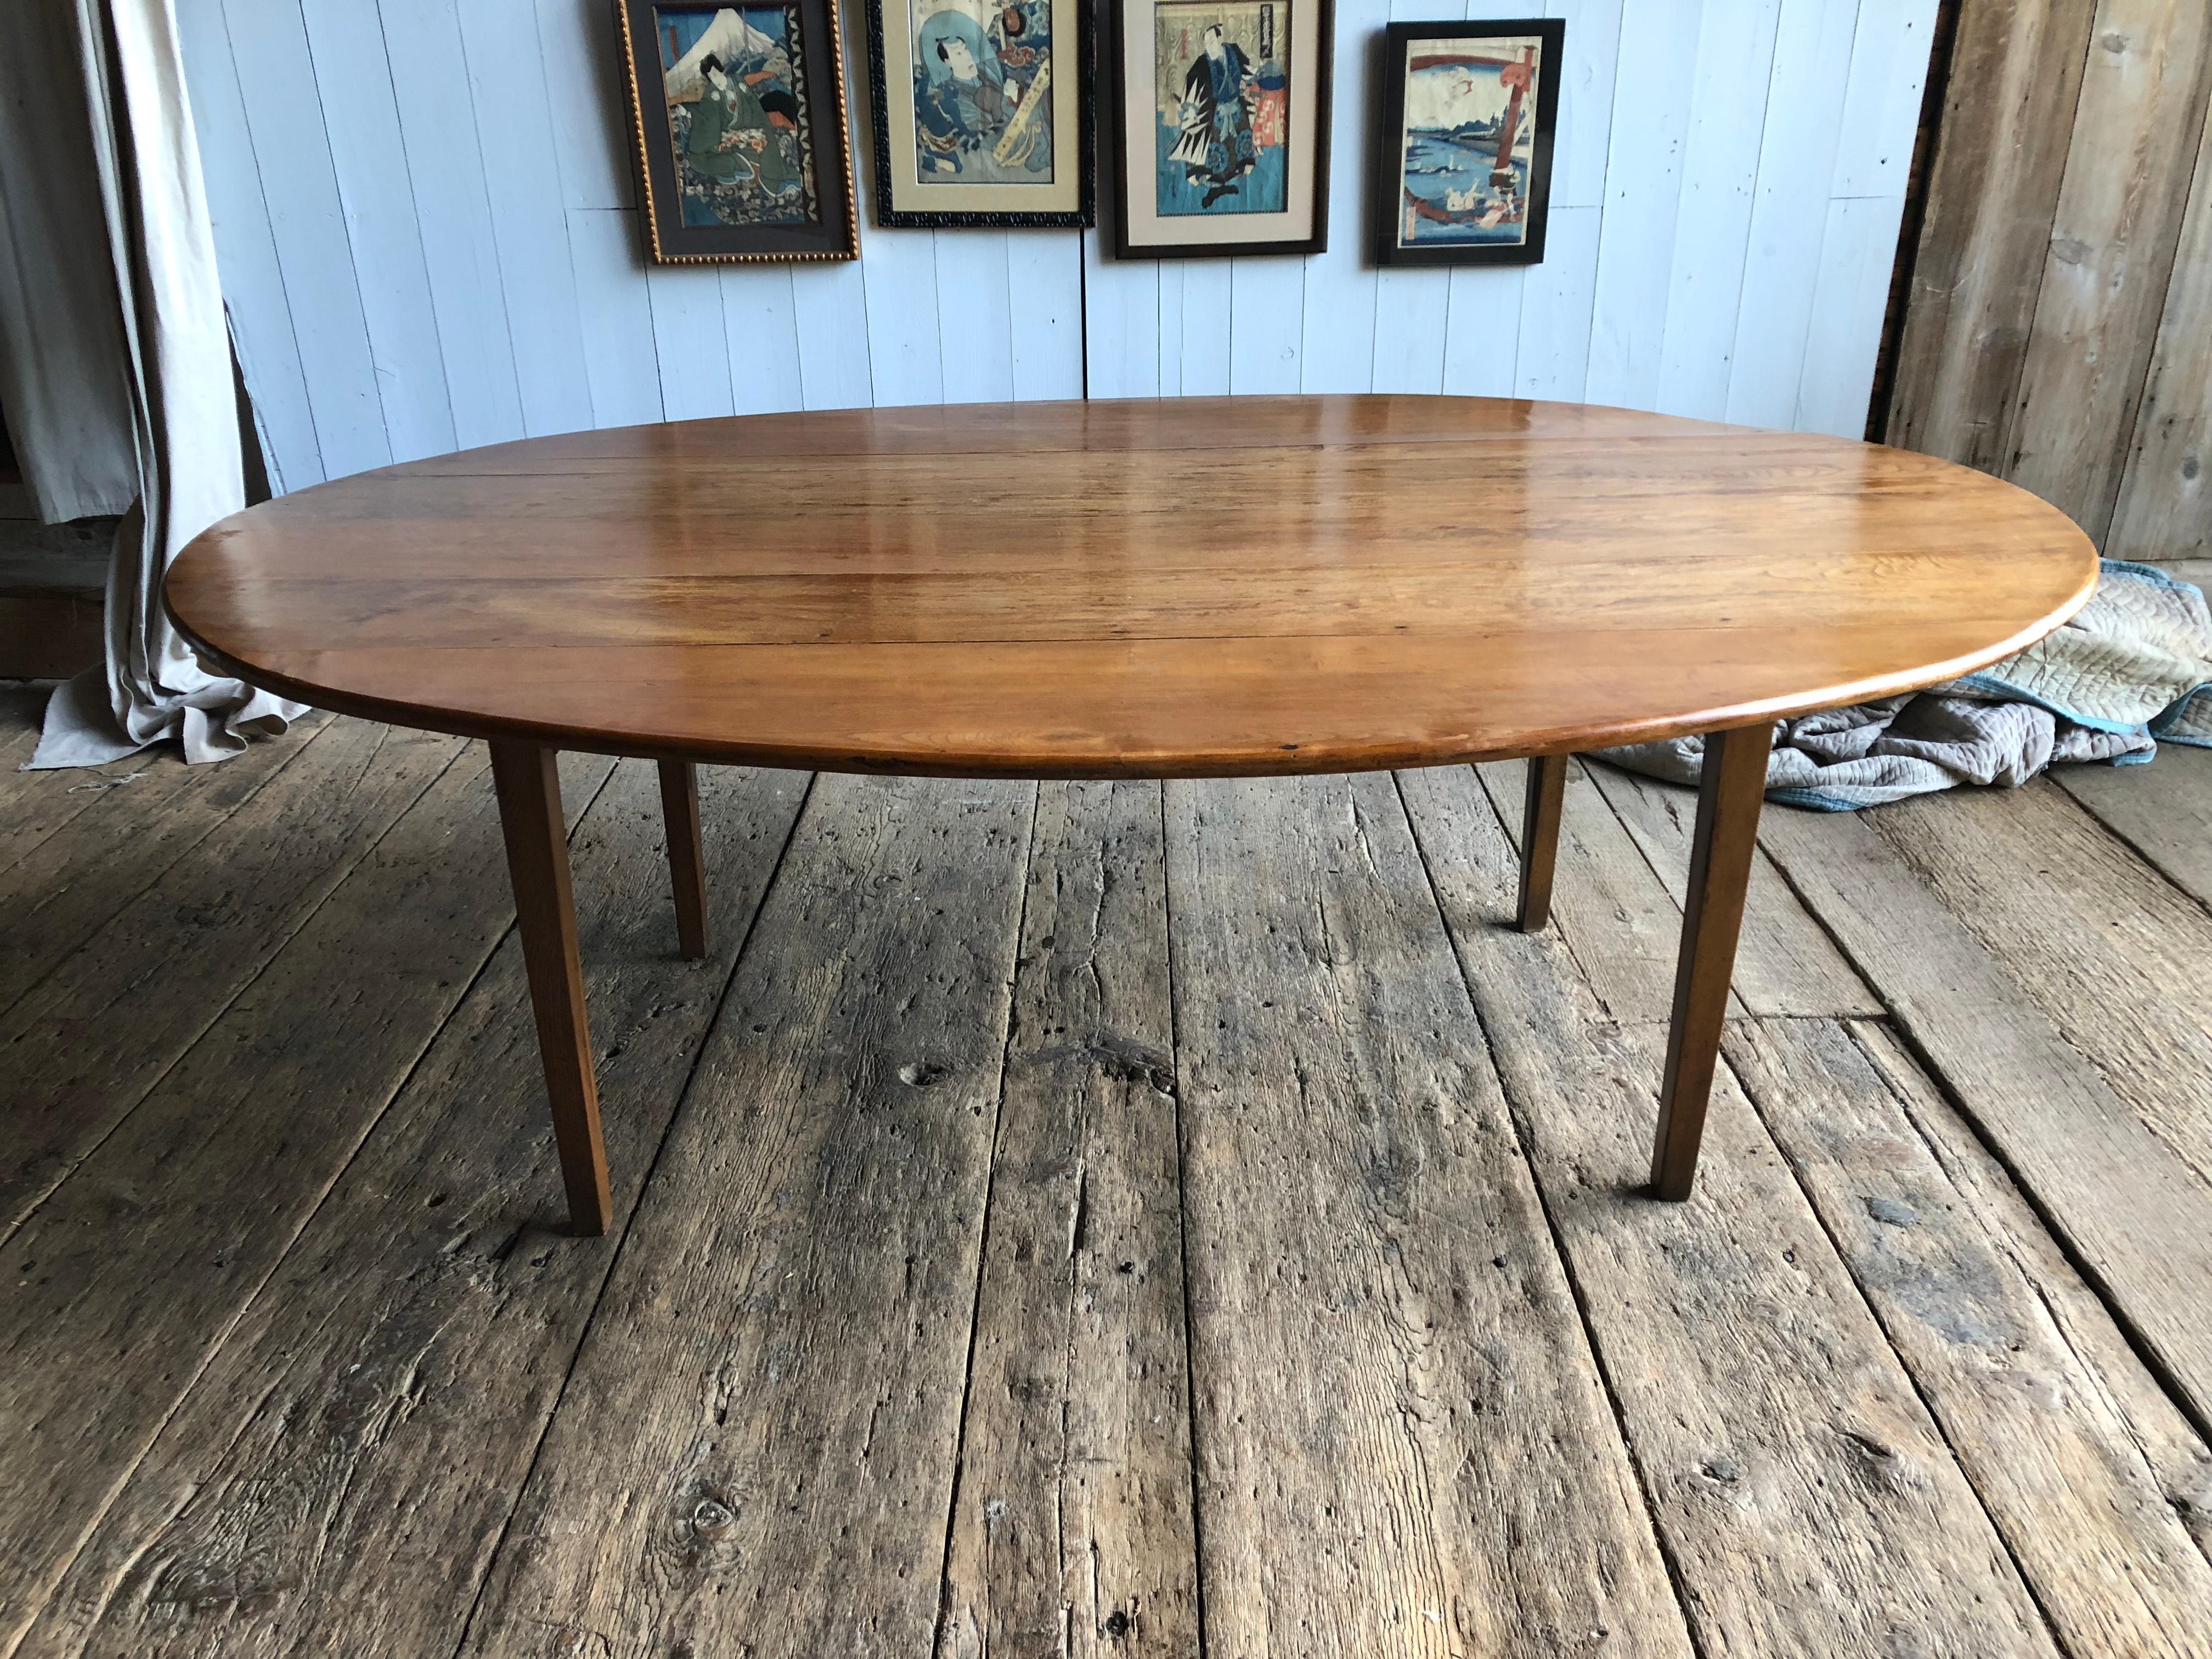 French Provincial French Country Large Oval Farm Table